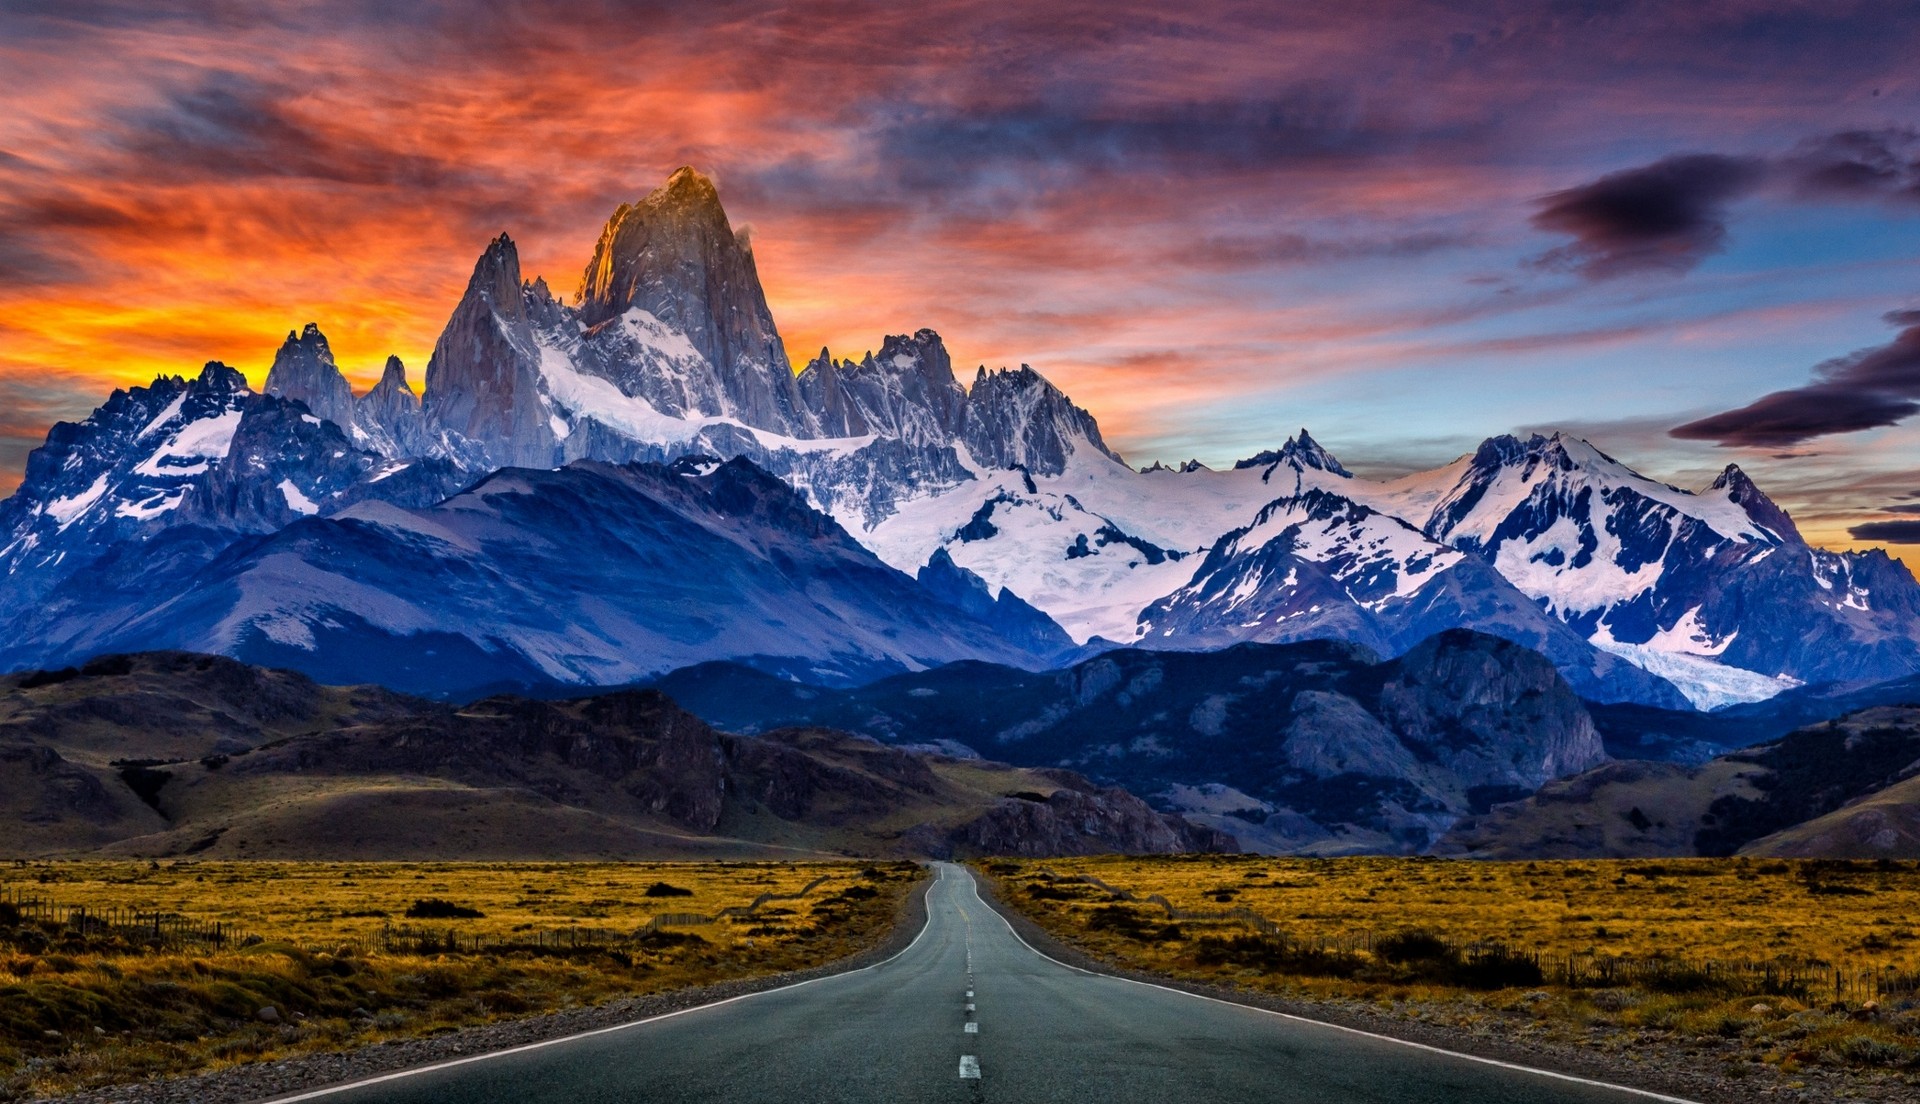 Nature Landscape Road Mountains Sunset Snowy Peak Argentina Sky Clouds Dry Grass Fence 1920x1104